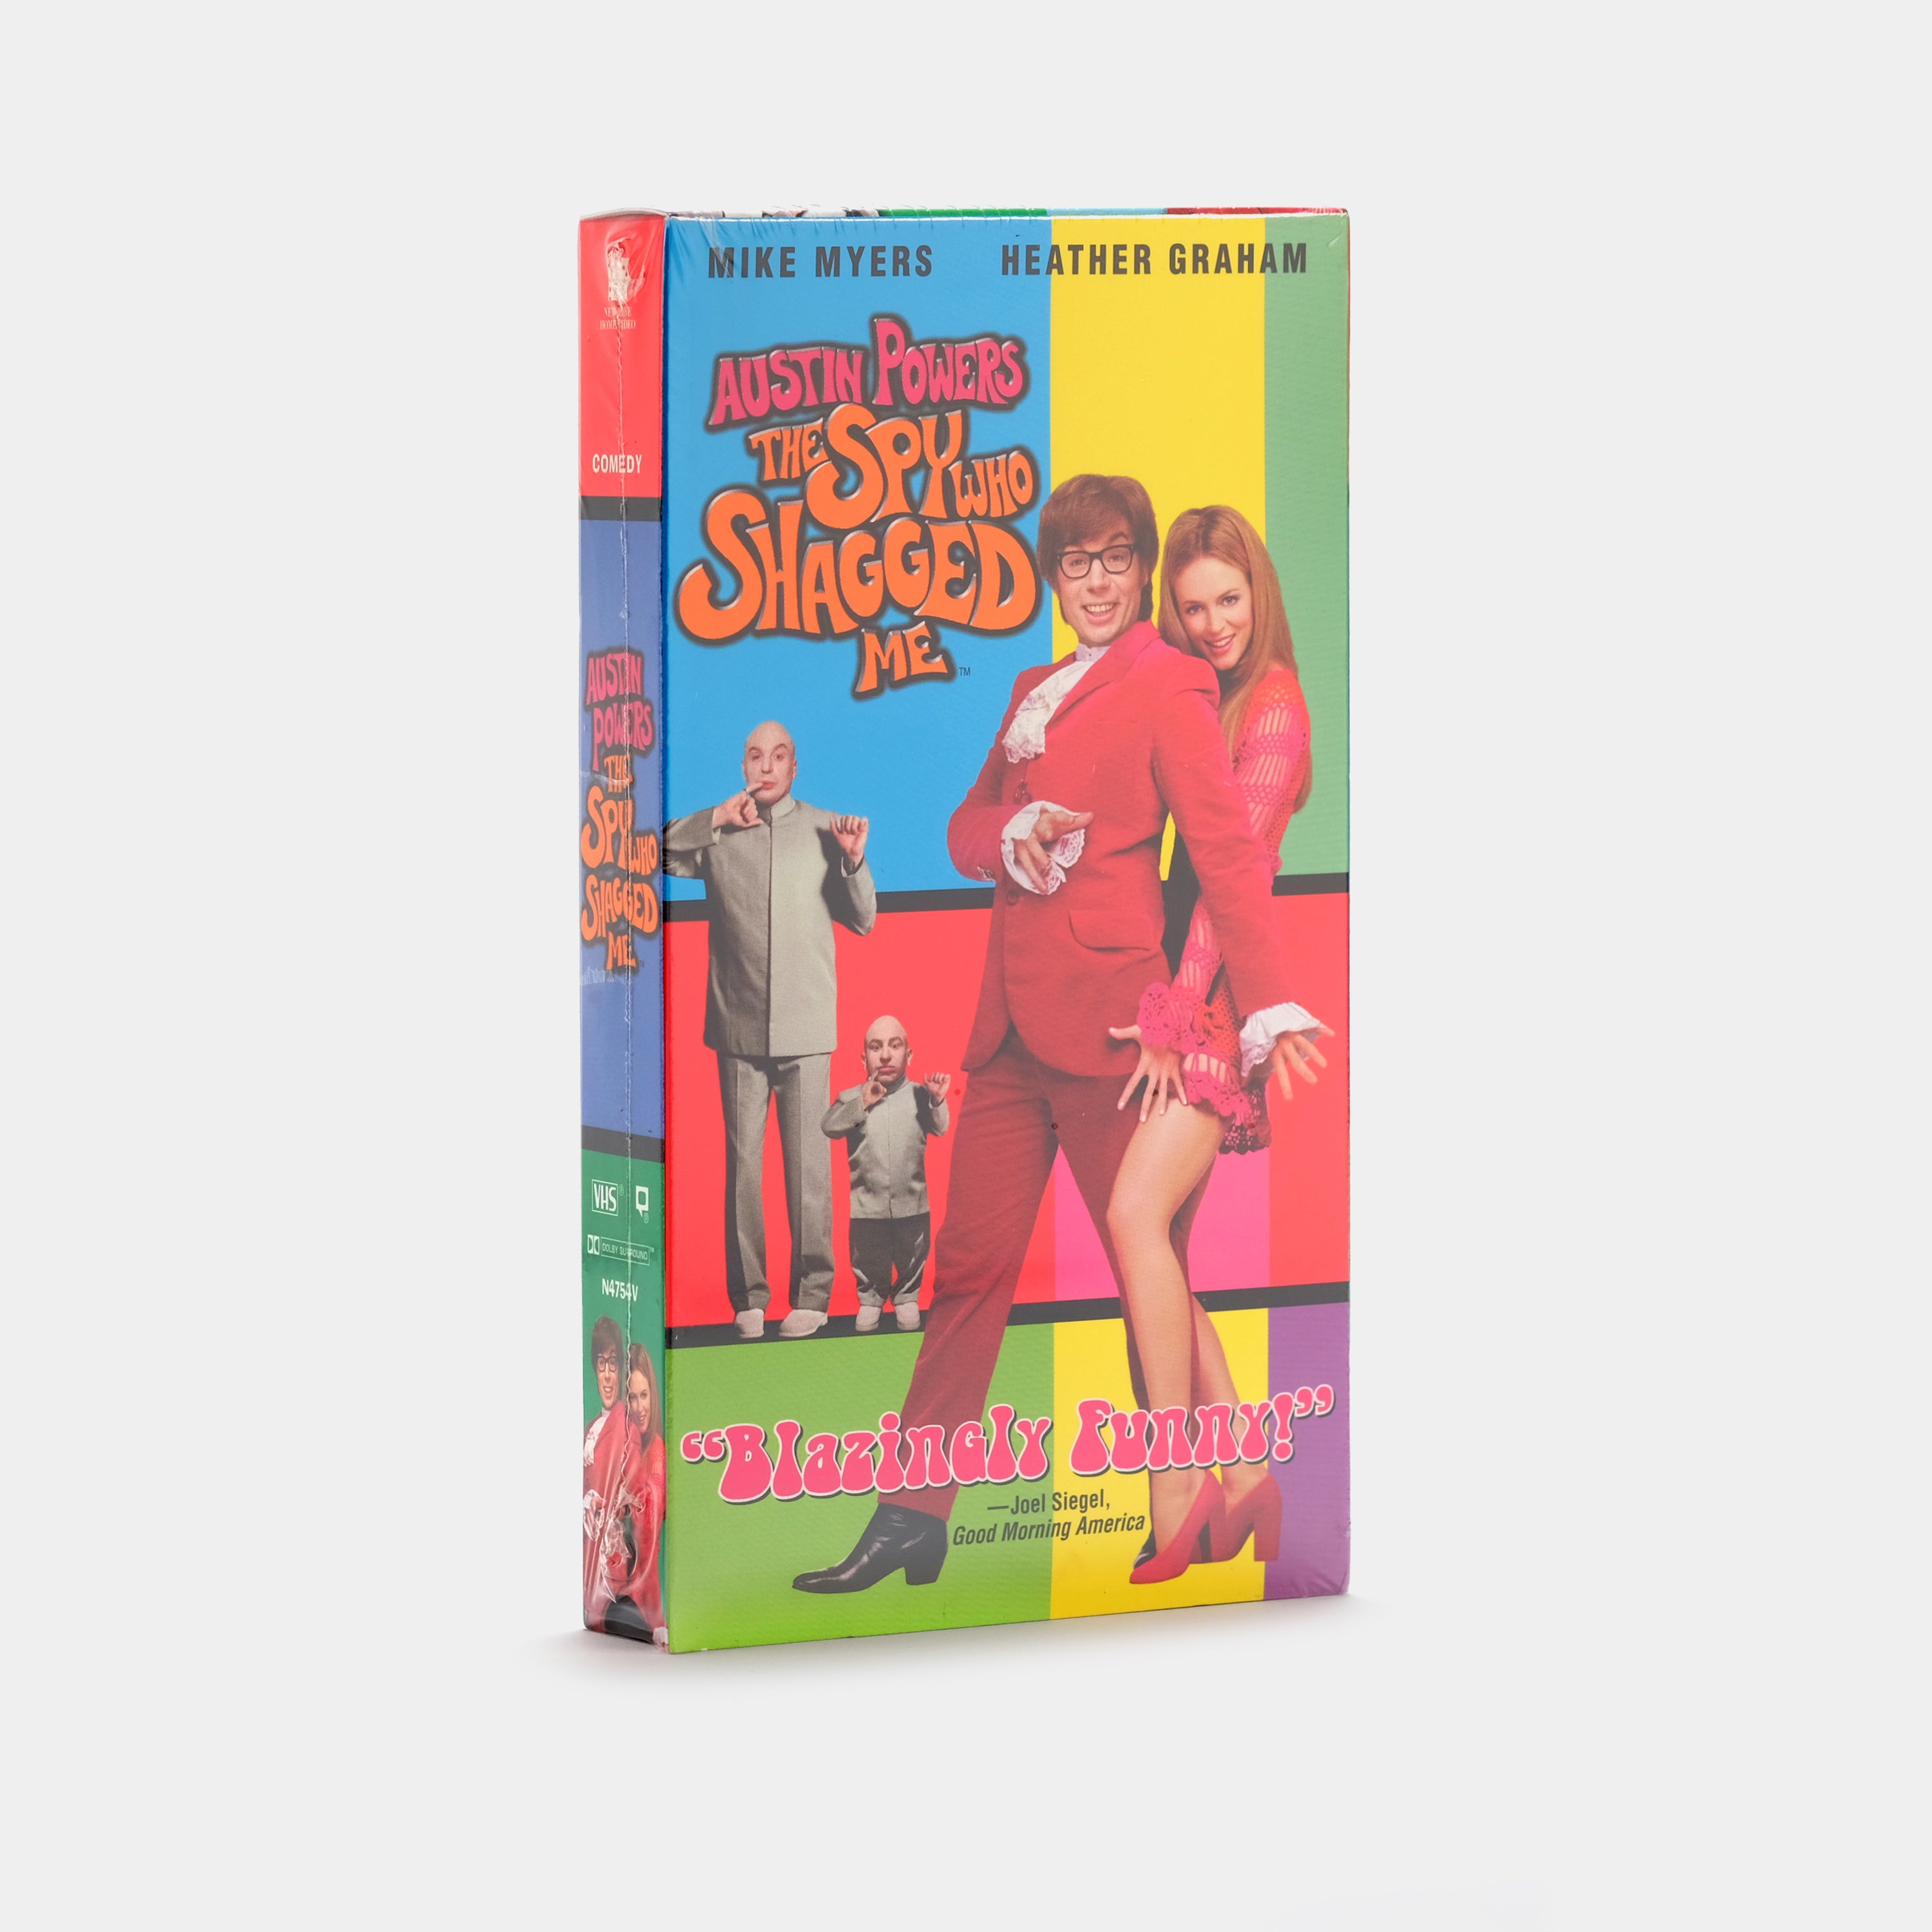 Austin Powers: The Spy Who Shagged Me (Sealed) VHS Tape